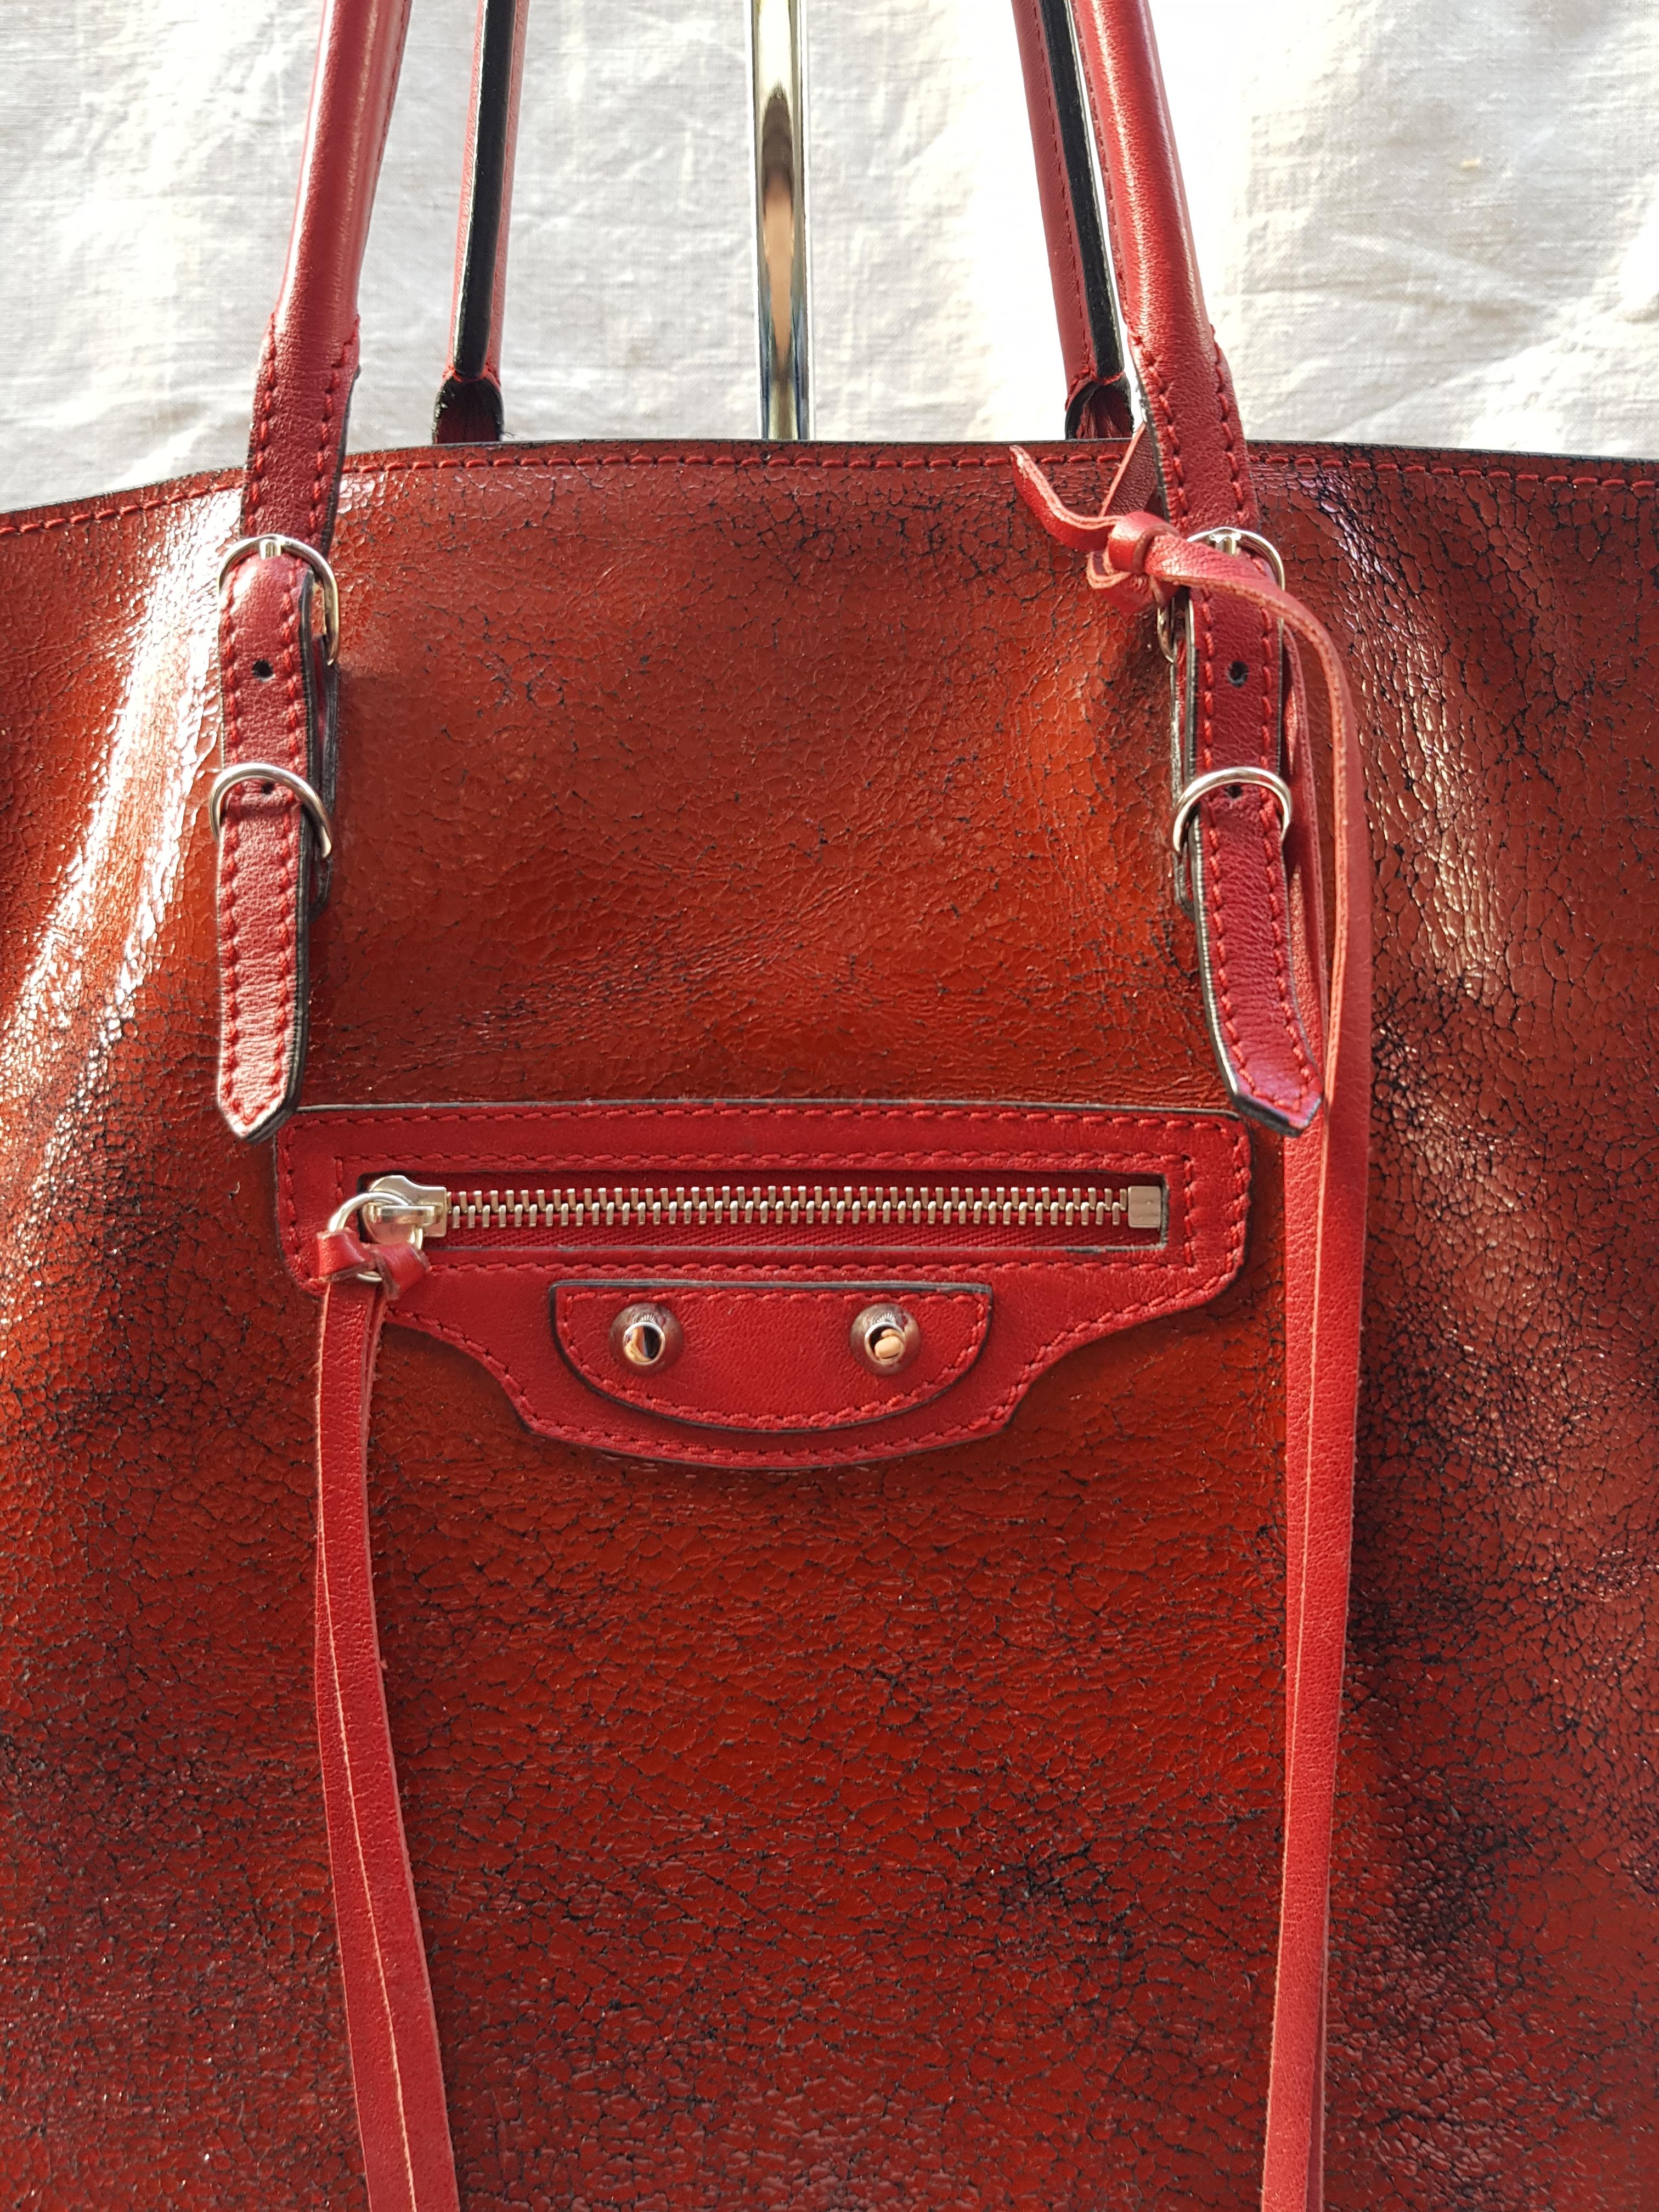 Beautiful Balenciaga Papier A4 tote in textured red leather.

-Classic small mirror on leather tassel
-Brass hardware
-Single exterior zip pocket
-Stud and buckle accents
-Dual slit pockets in interior
-100% Leather
-Circa 1999-2009
-Very good